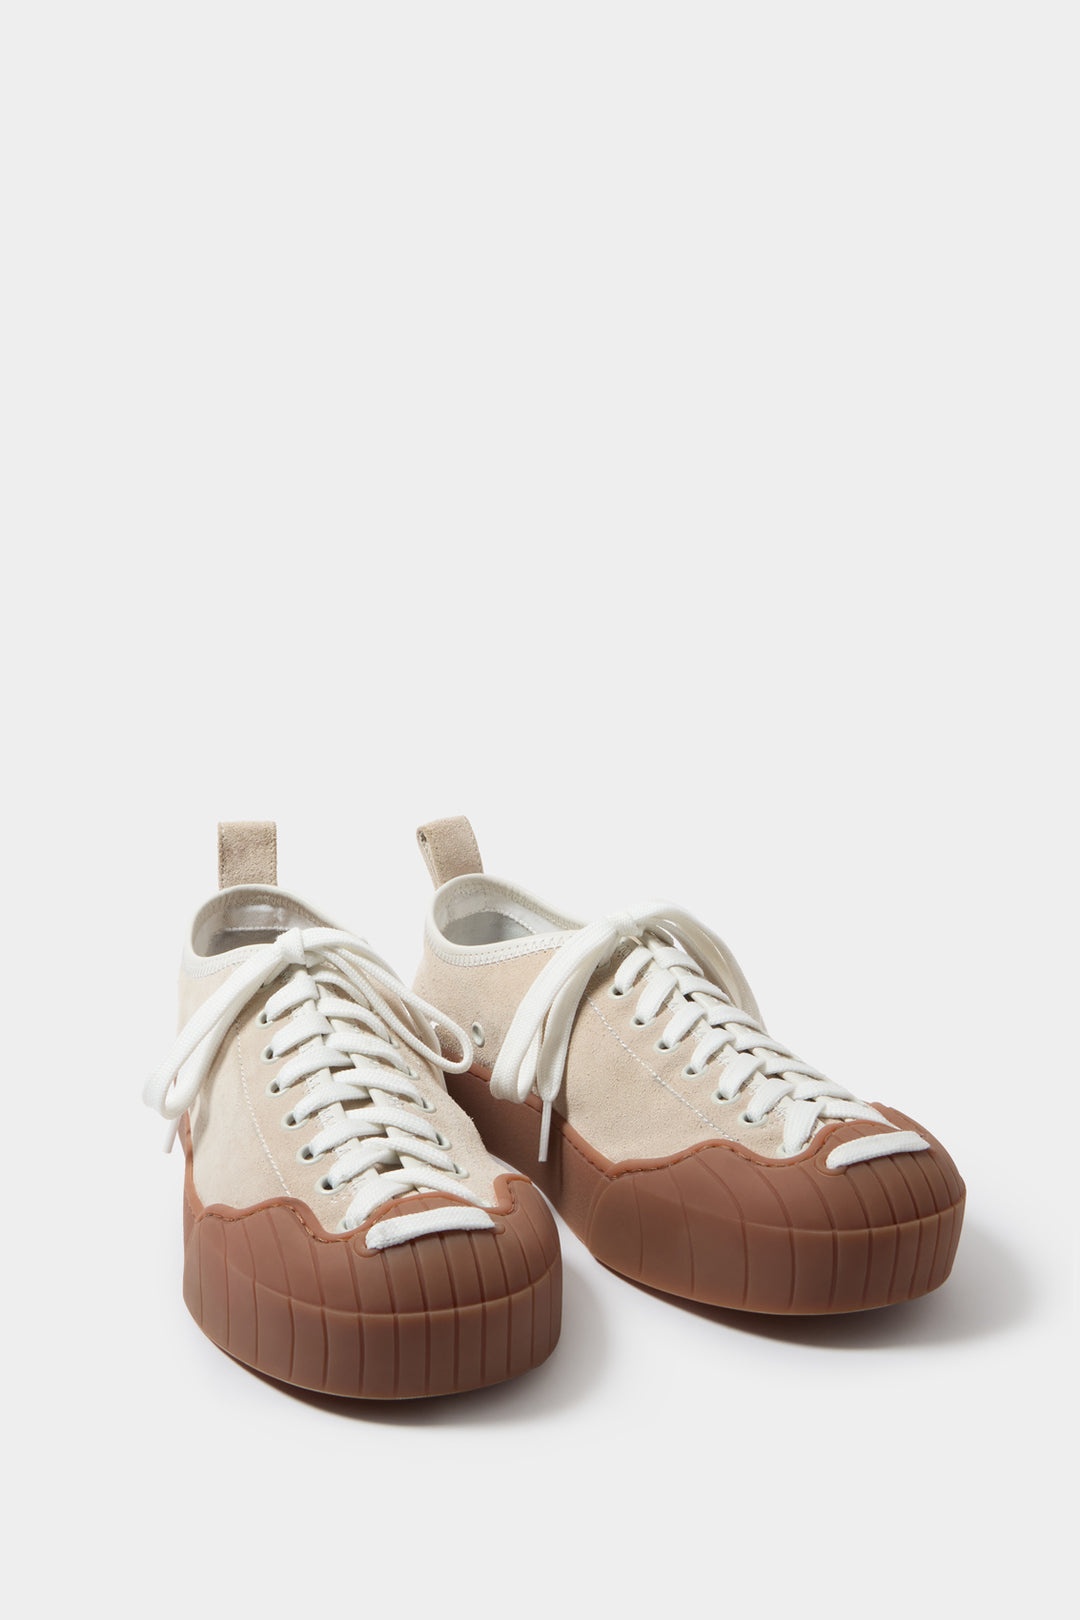 ISI LOW SHOES / off white - 2